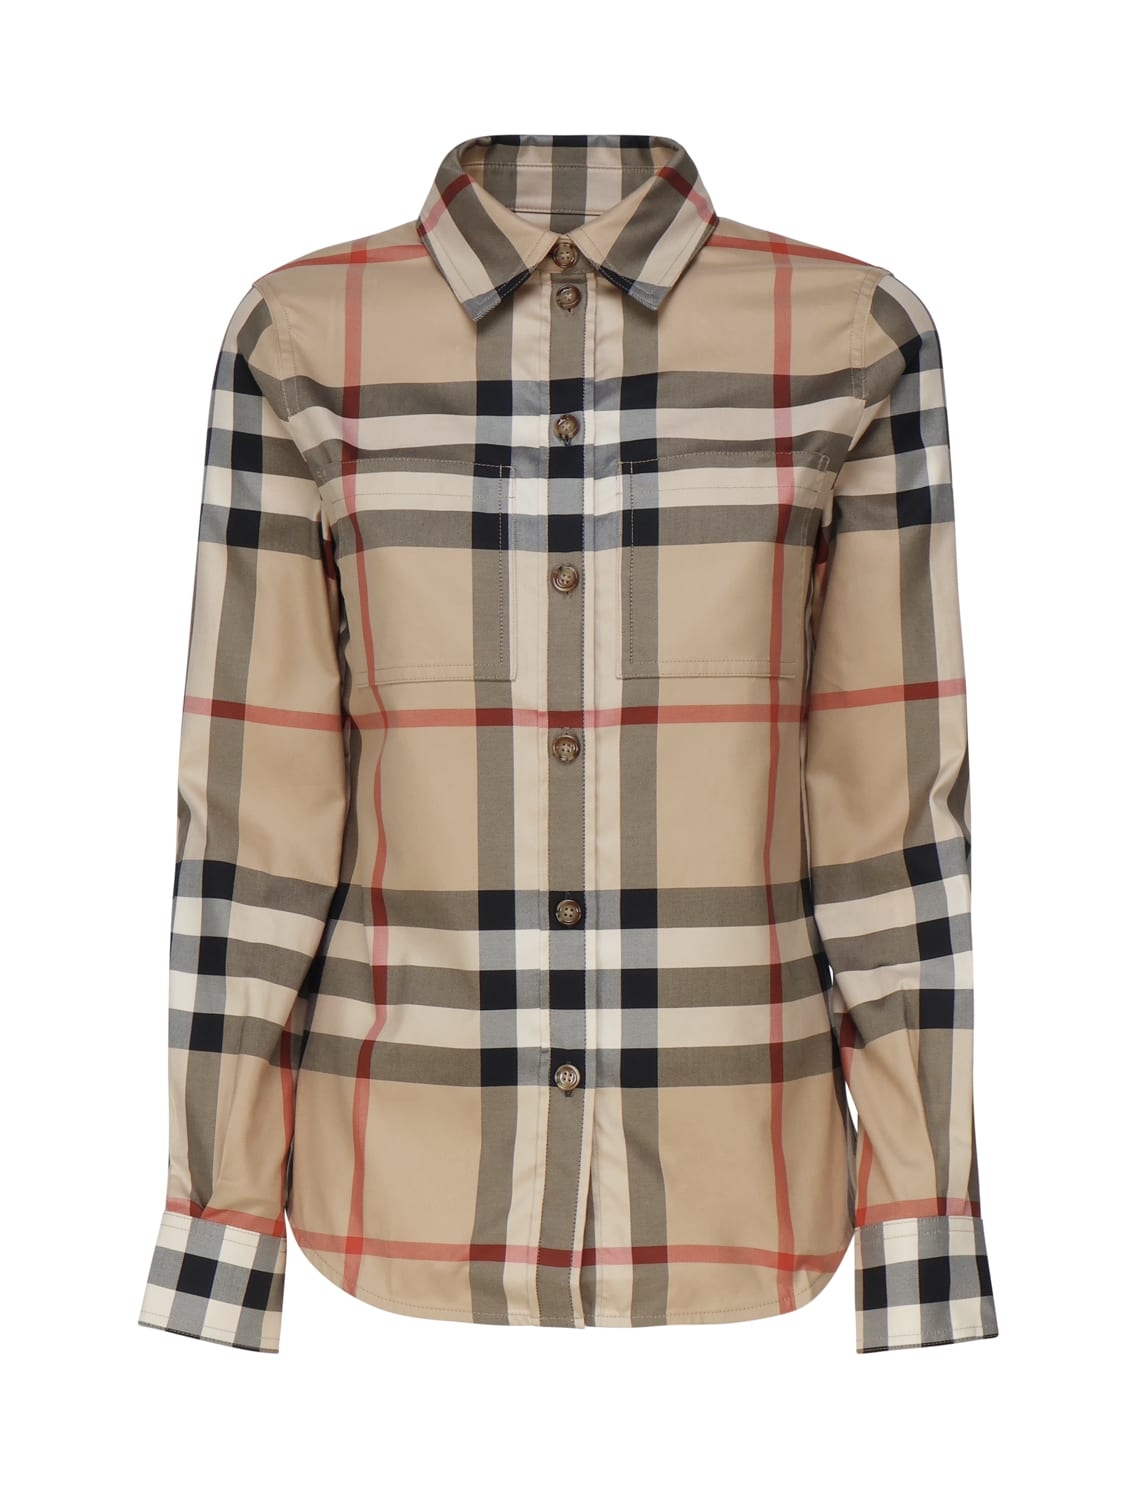 Burberry Vintage Check Shirt In Cotton In Archive Beige Ip Chk